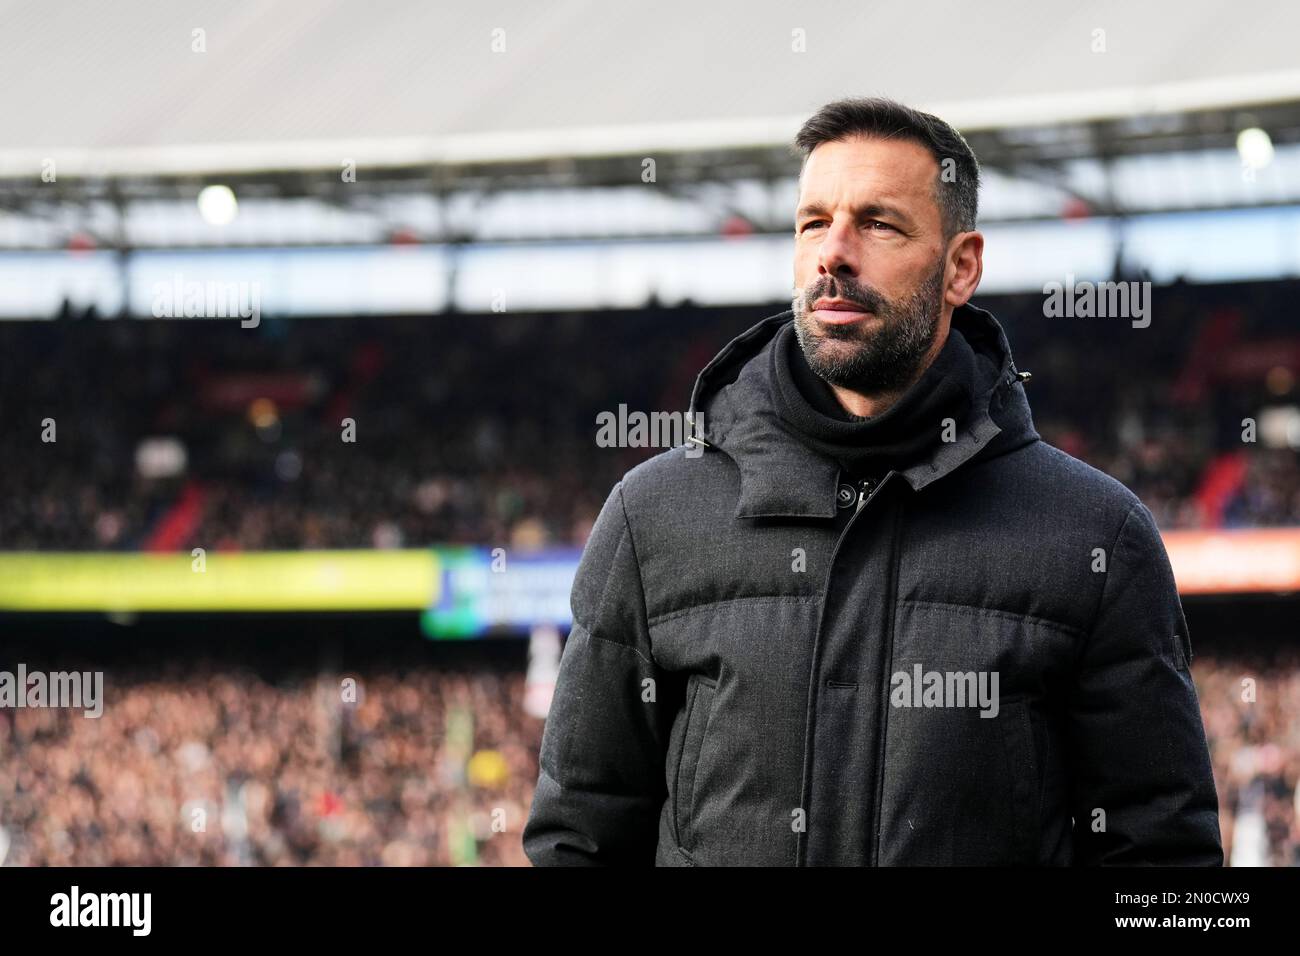 Rotterdam - Ruud van Nistelrooy of PSV Eindhoven during the match between Feyenoord v PSV Eindhoven at Stadion Feijenoord De Kuip on 5 February 2023 in Rotterdam, Netherlands. (Box to Box Pictures/Yannick Verhoeven) Stock Photo